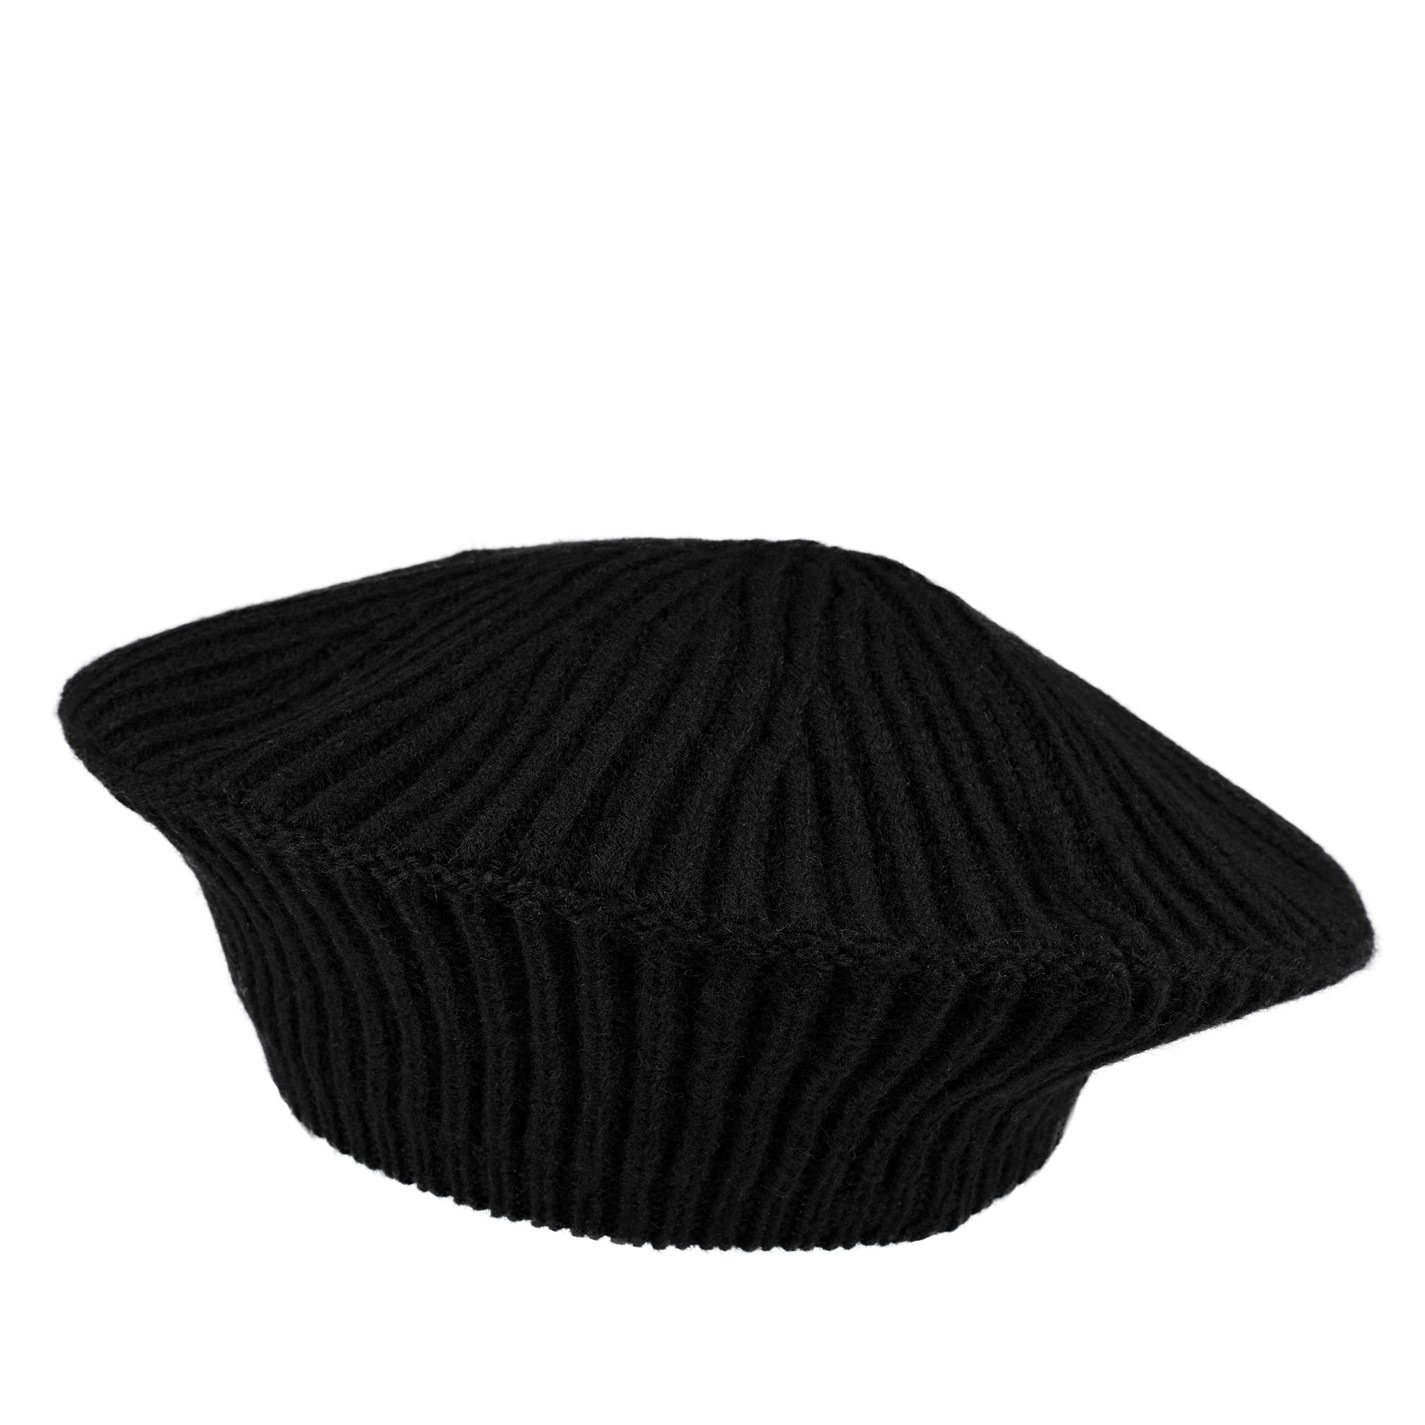 STRUCTURED RIBBED BERET - 3